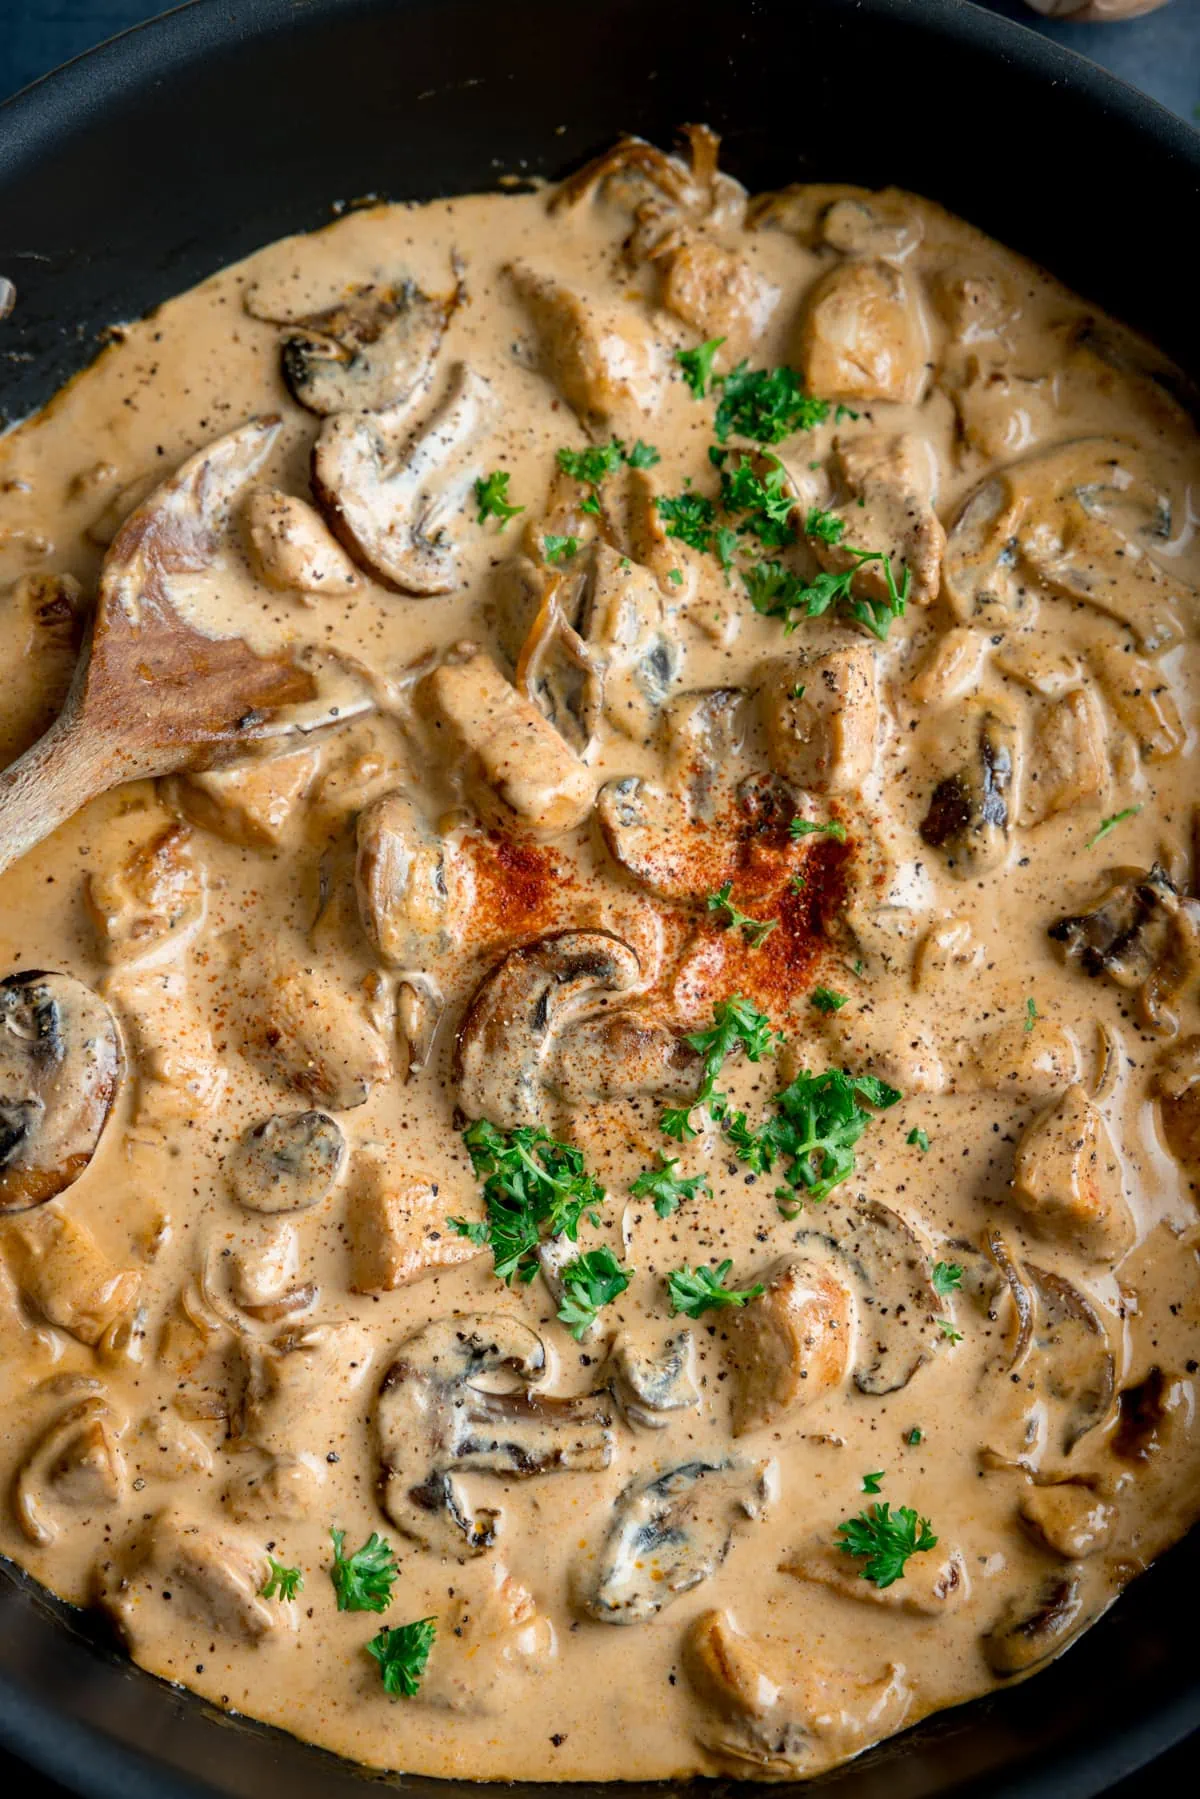 Tall, overhead, close-up image of chicken and mushroom stroganoff in a dark pan. The pan is on a dark surface with a wooden spoon sticking out. The stroganoff is garnished with chopped parsley and paprika.